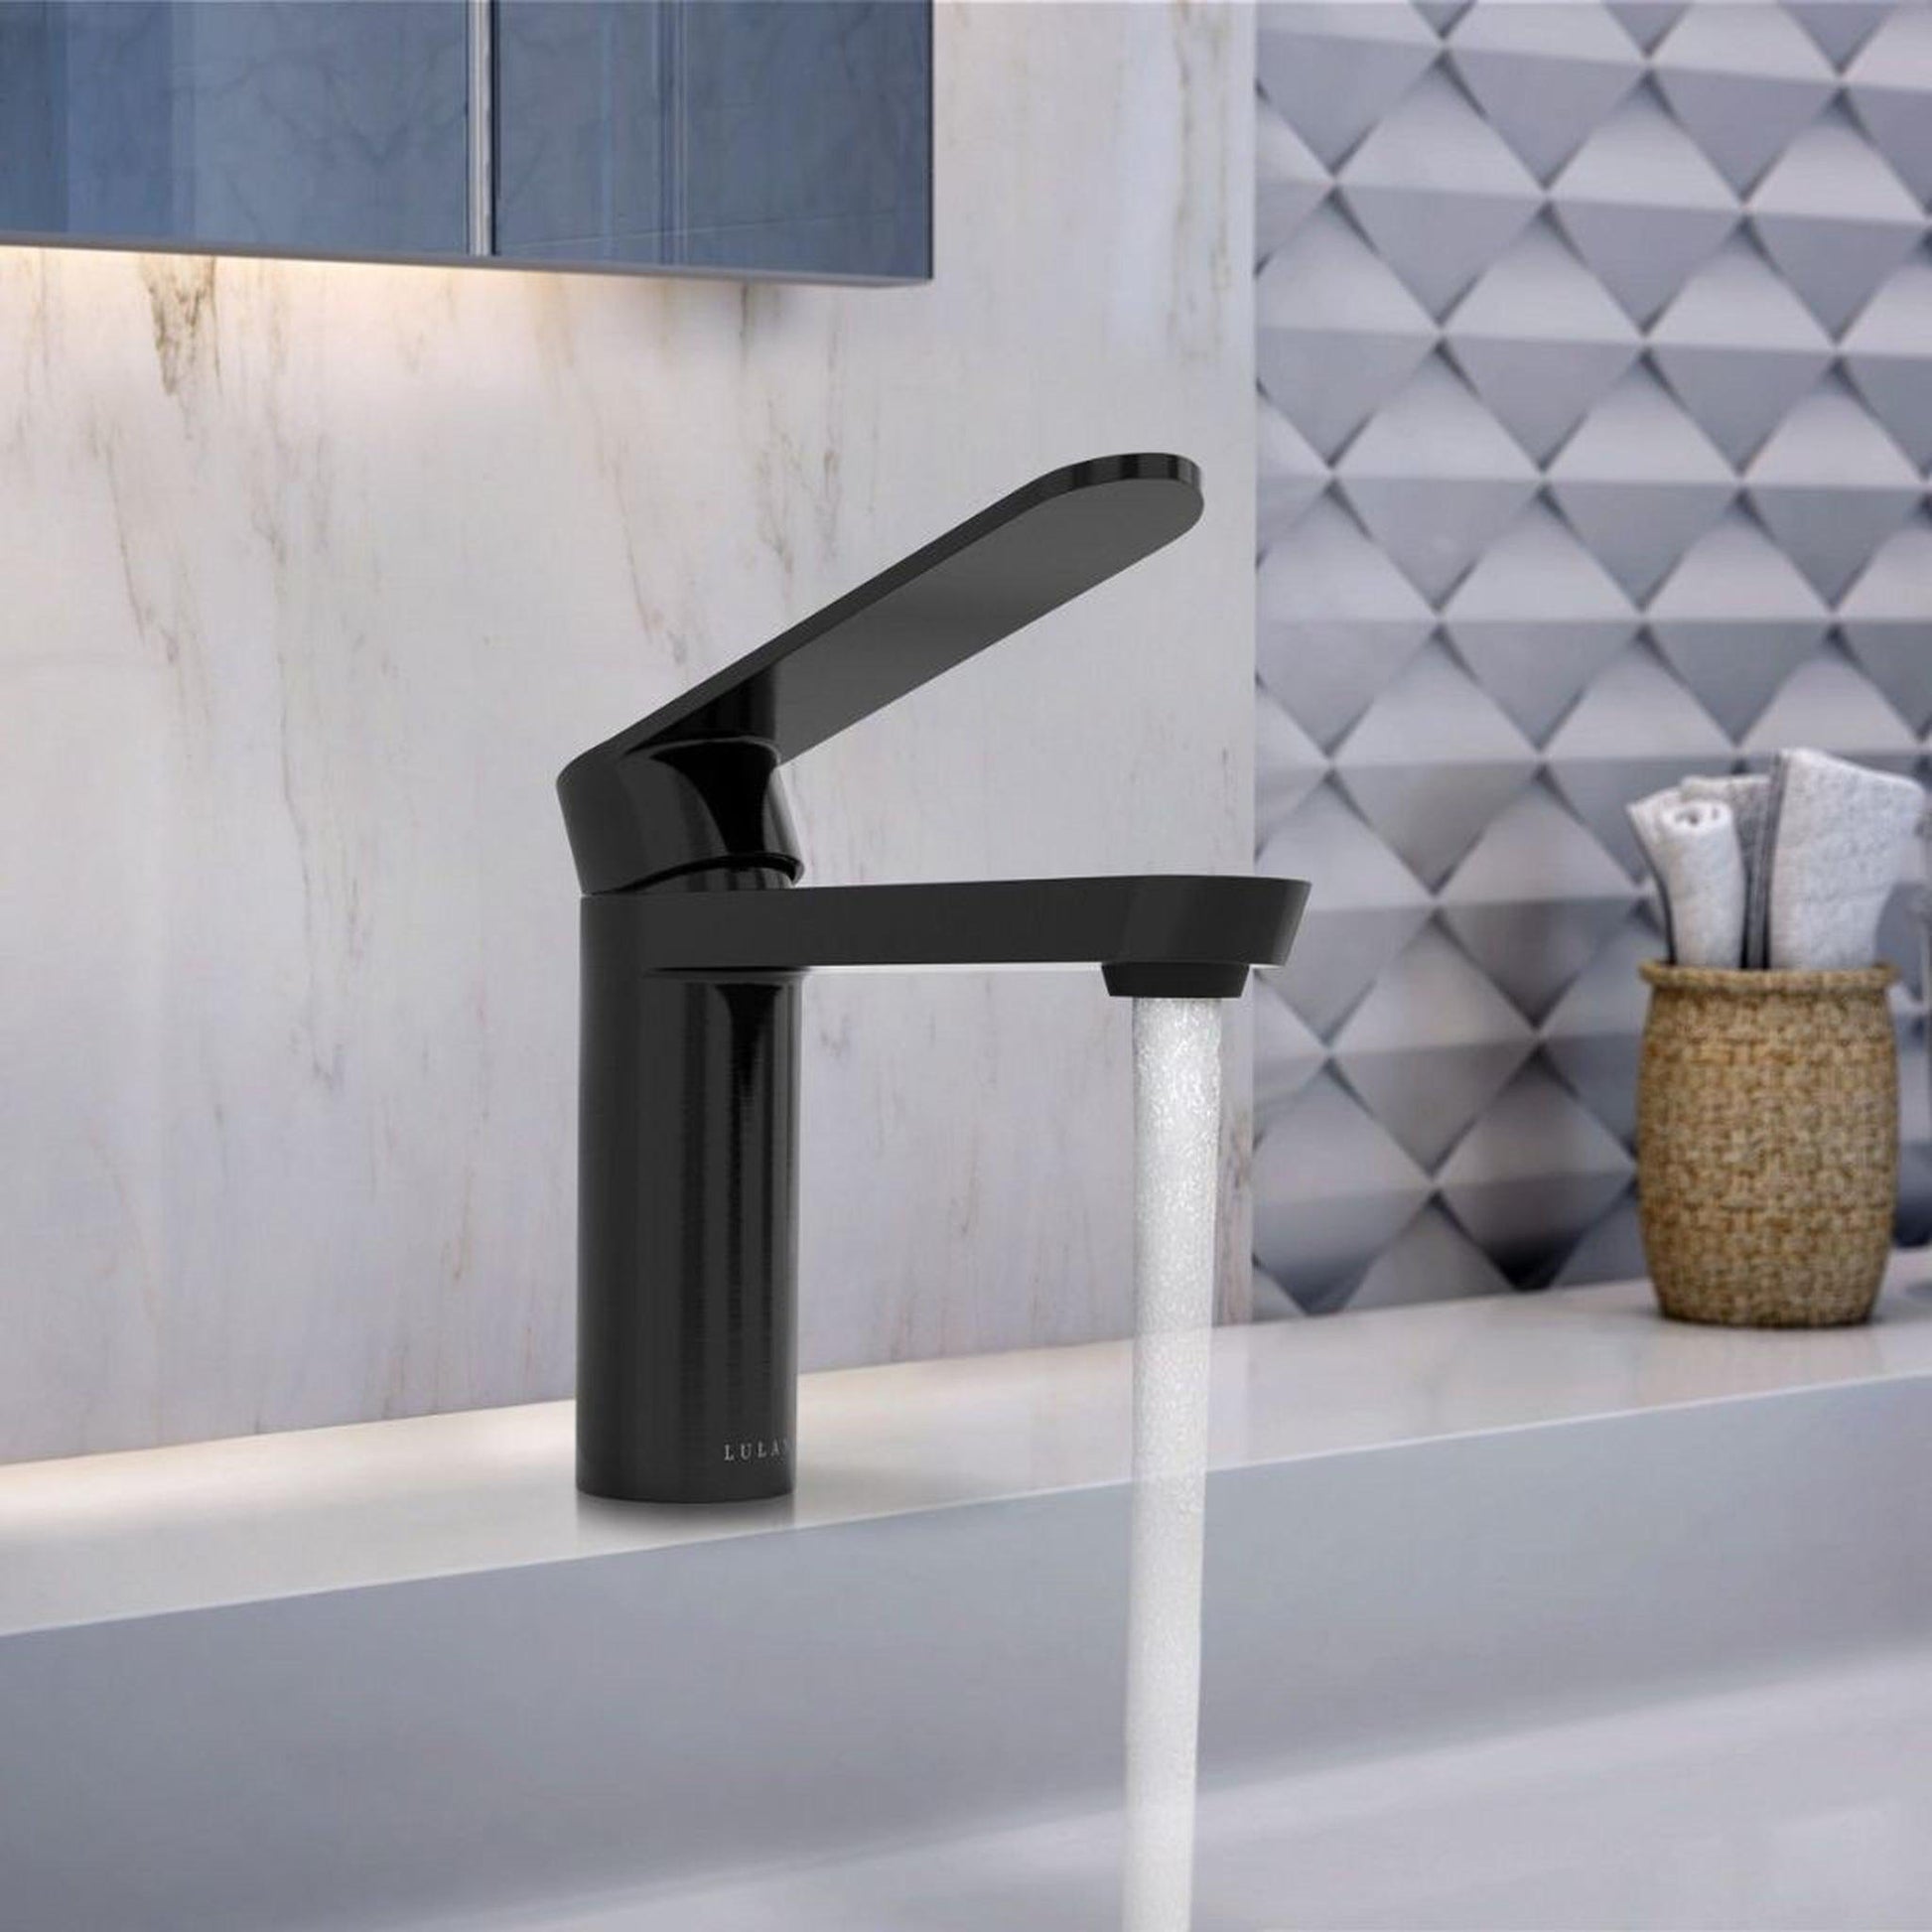 Lulani Yasawa Steel Black 1.2 GPM Single Hole Stainless Steel Faucet With Drain Assembly